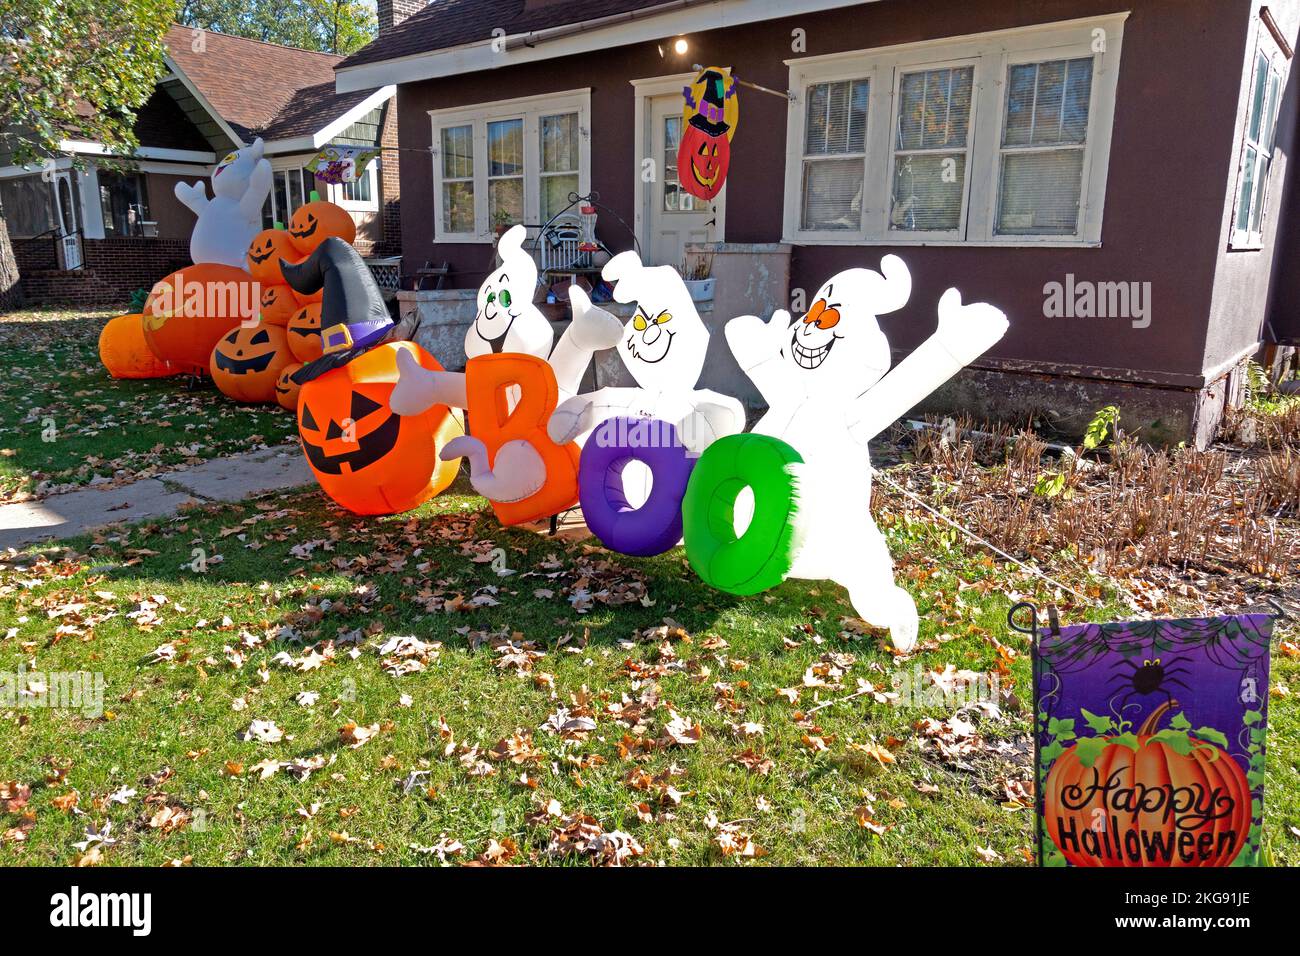 A jolly group of blow-up Halloween ghosts and jack-o'-lanterns holding the large letters Boo. Fergus Falls Minnesota MN USA Stock Photo